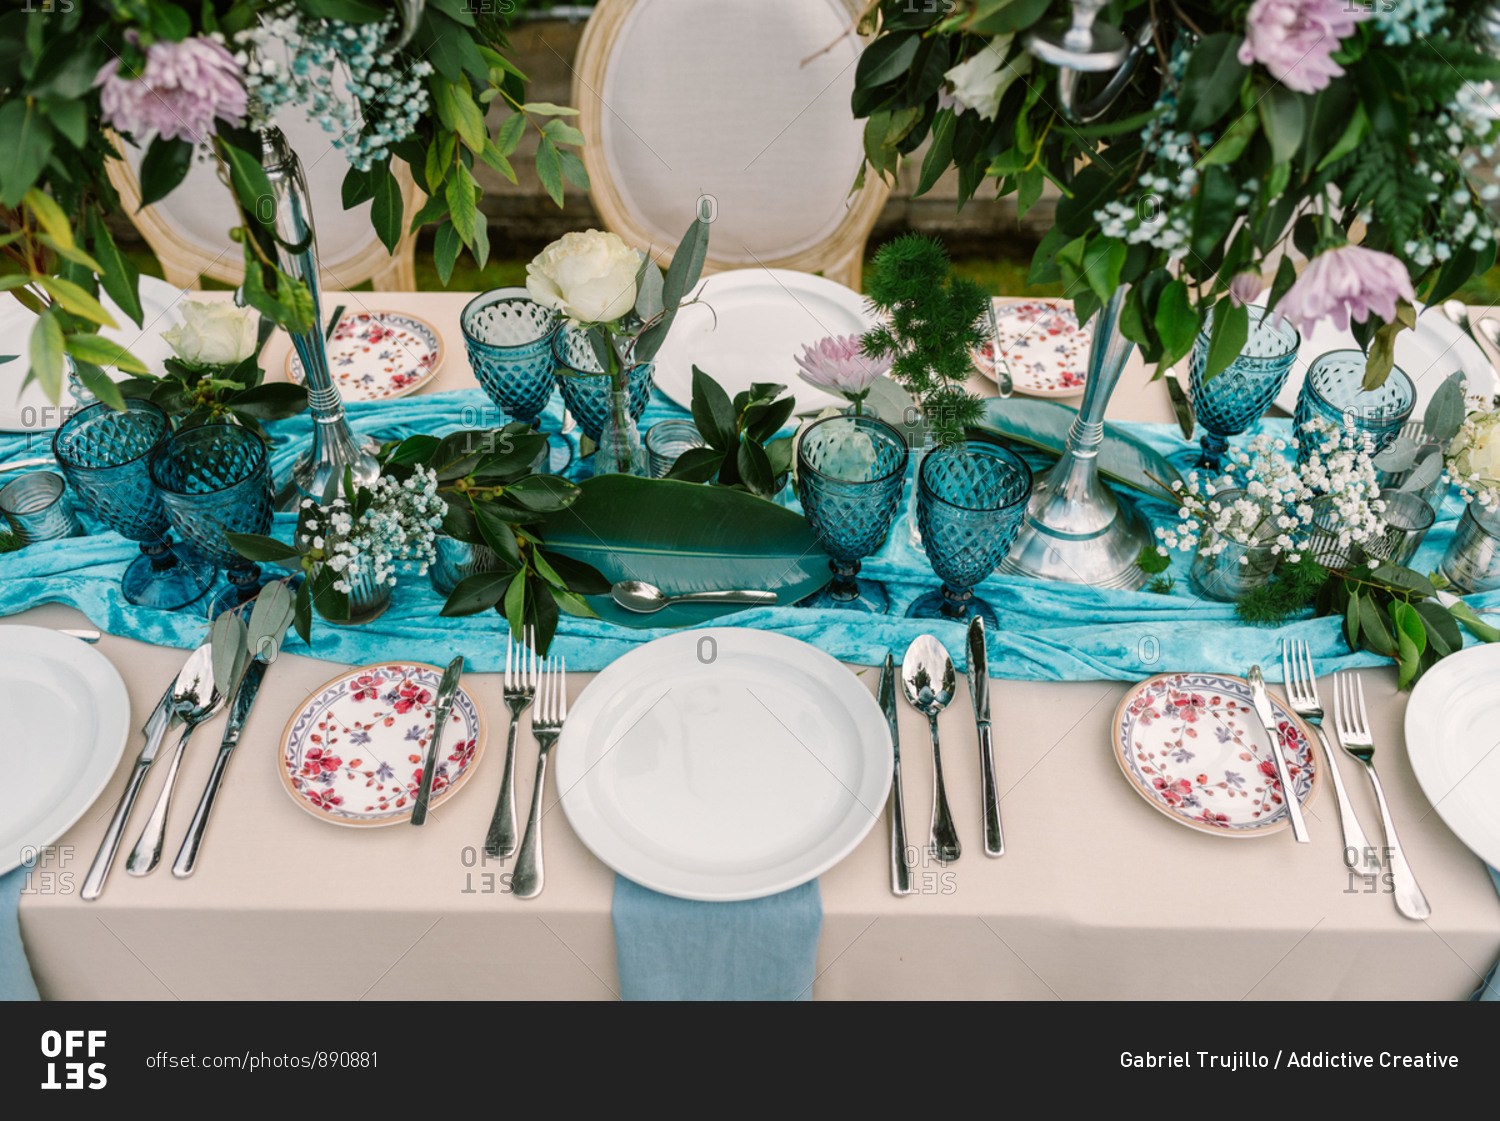 From above of wedding table decorated with blue and beige cloth and flowers bouquets in tall vases and served with porcelain plates and blue glasses